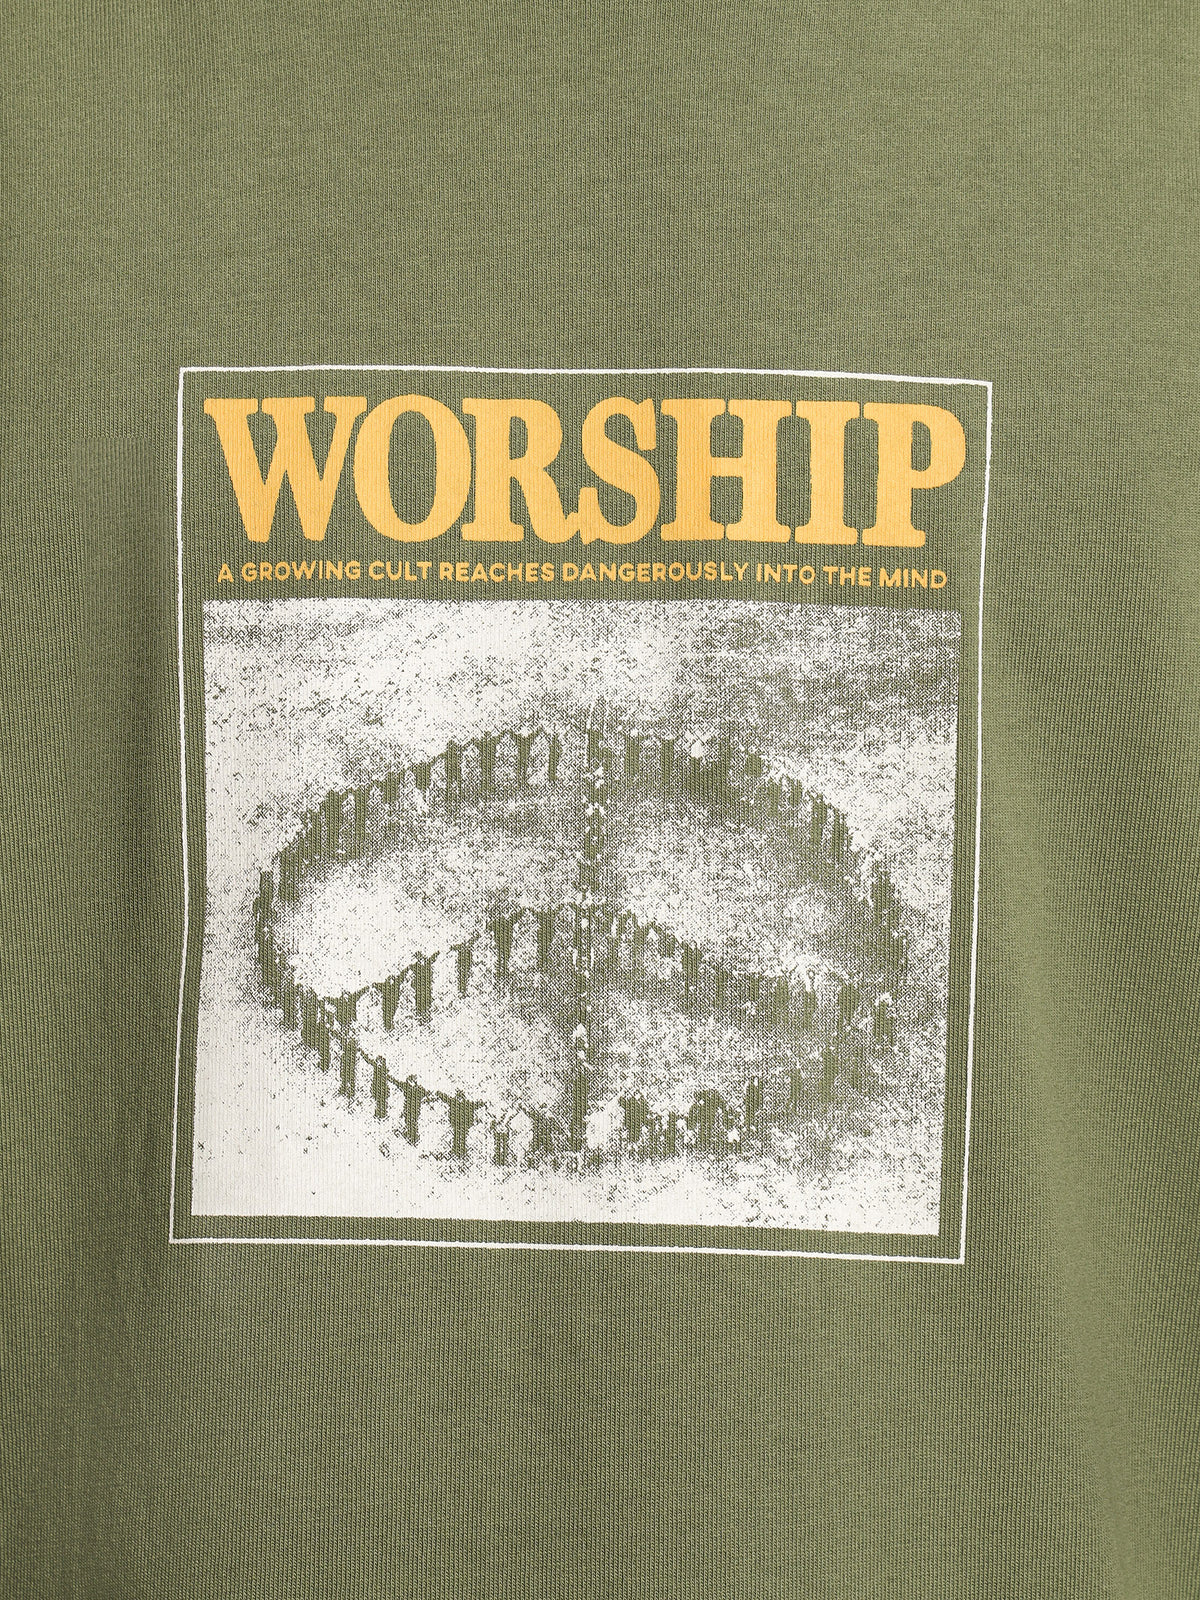 Ceremony T-Shirt in Forest Green